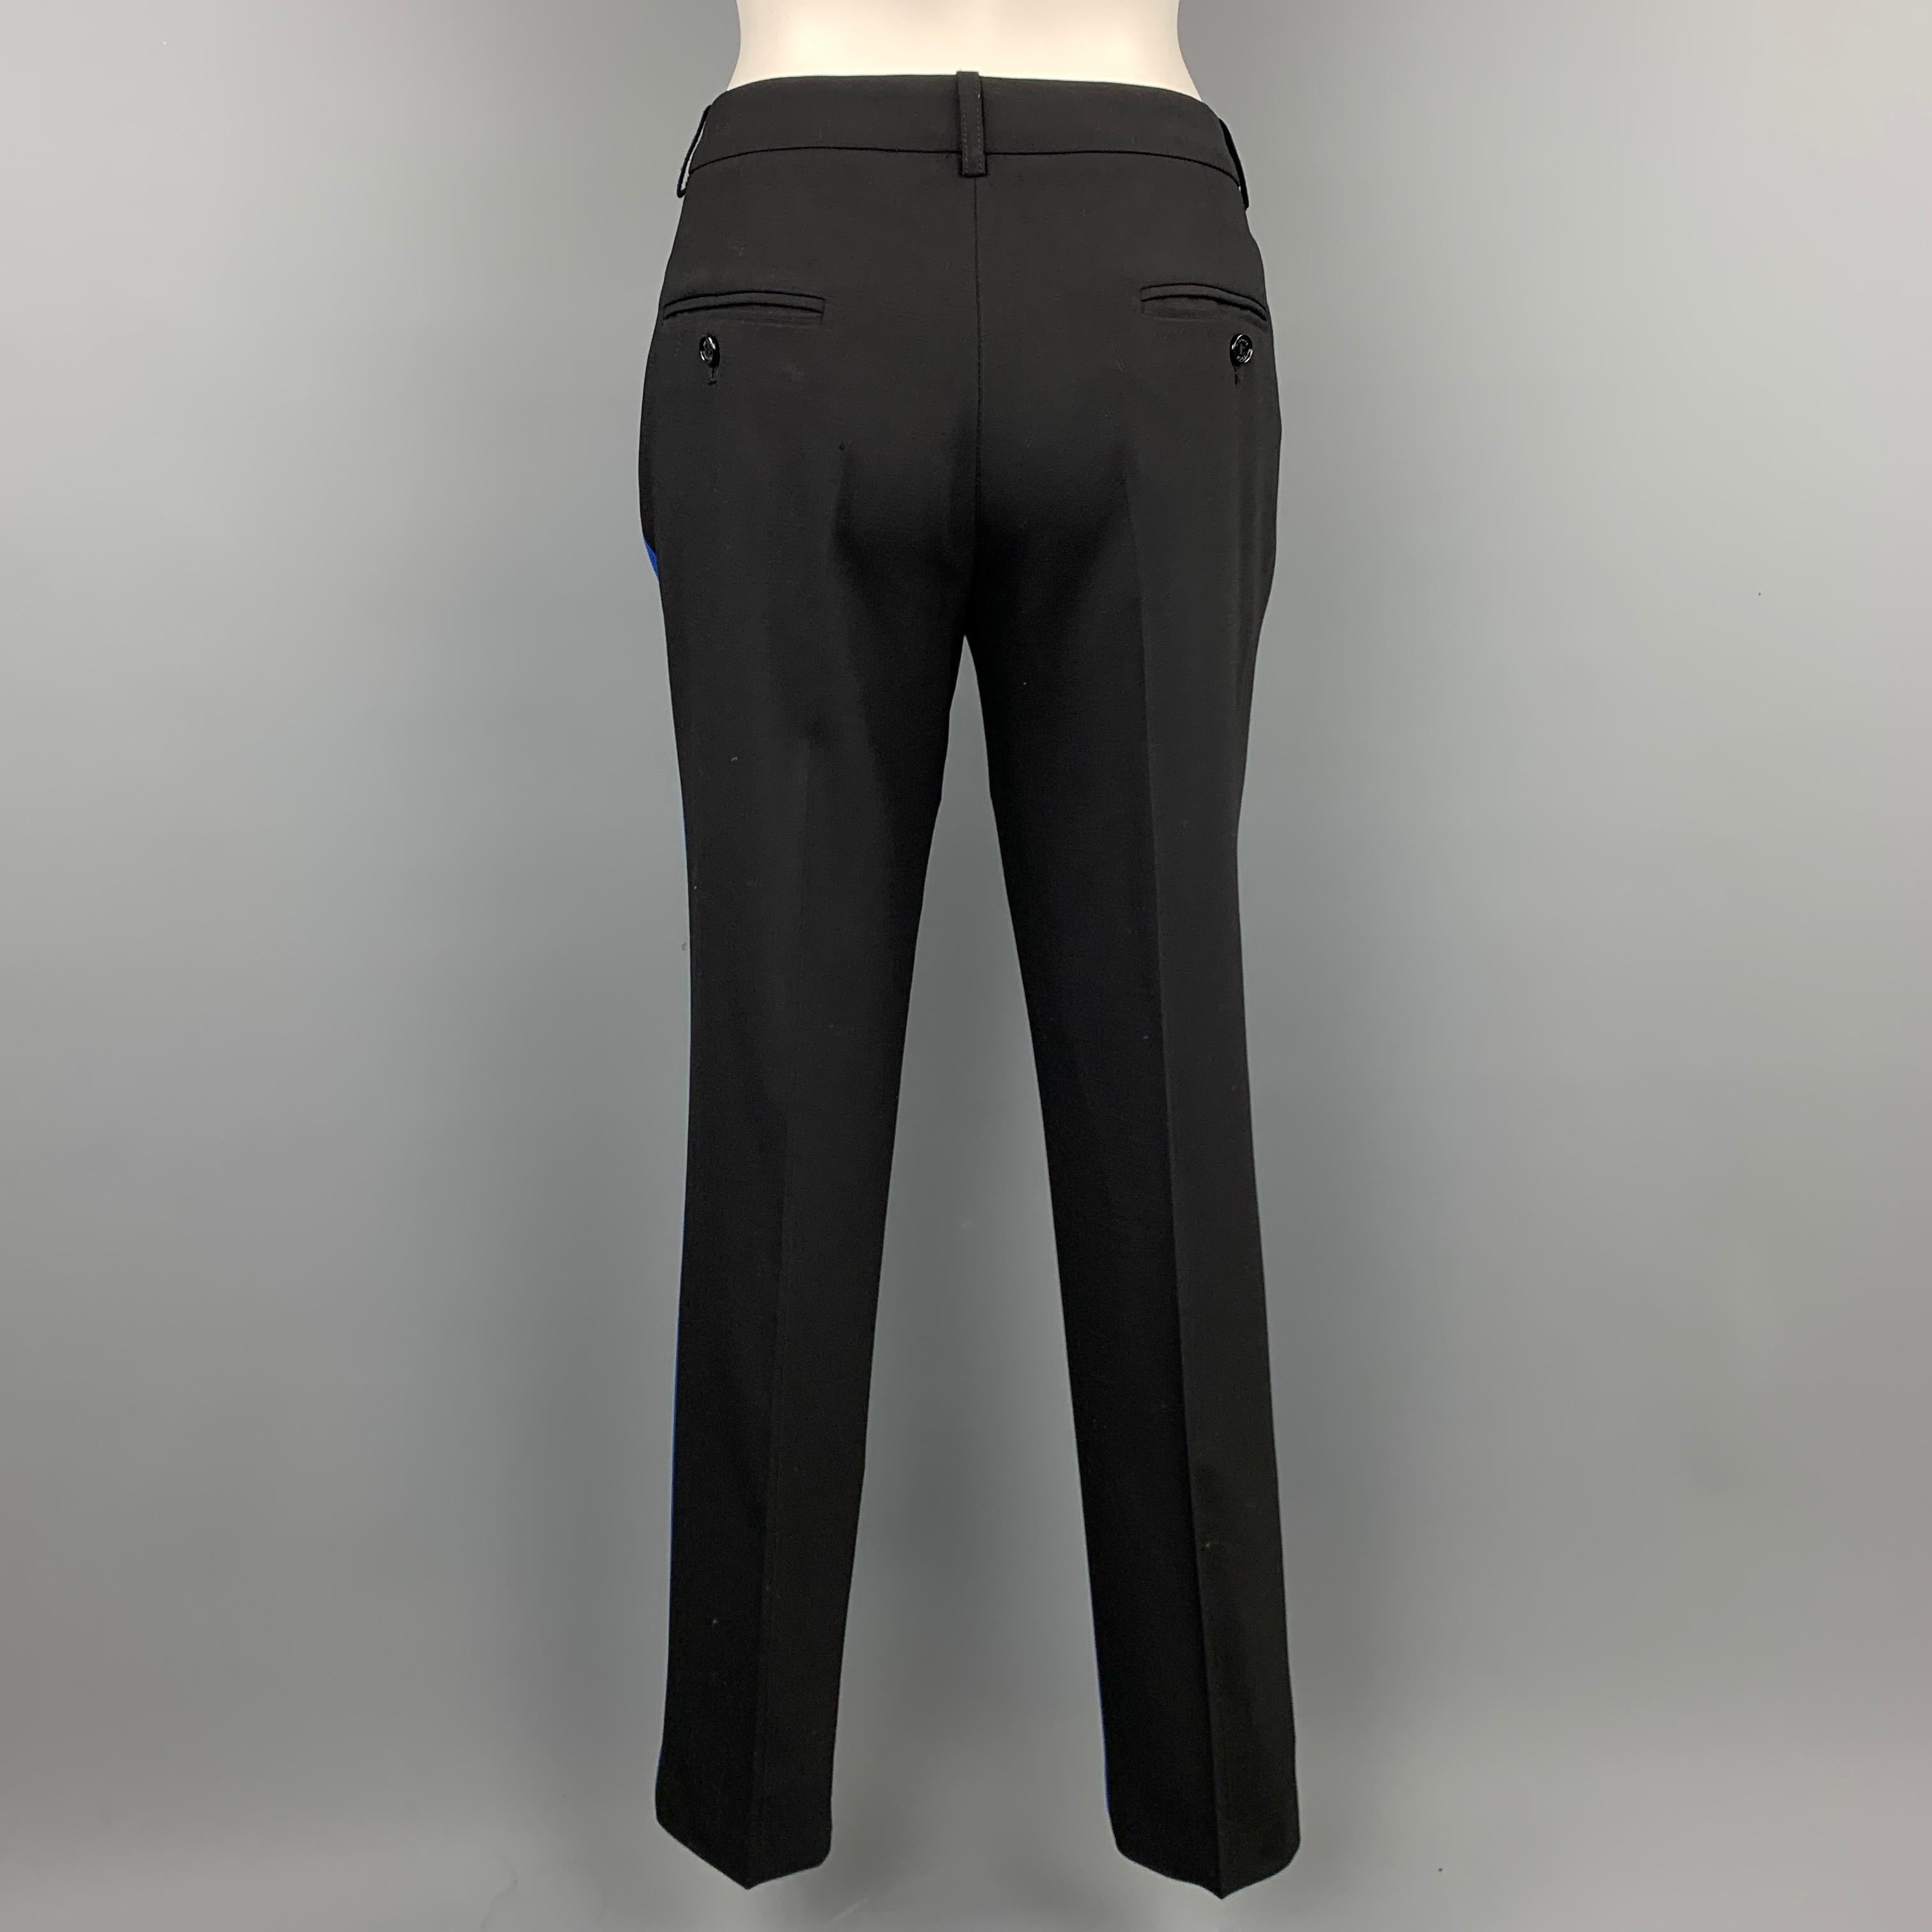 MICHAEL KORS dress pants comes in a blue & black color block cotton featuring a narrow leg, slit pockets, and a zip fly closure. Made in Italy.

Very Good Pre-Owned Condition.
Marked: 6

Measurements:

Waist: 30 in.
Rise: 9.5 in.
Inseam: 29 in.  